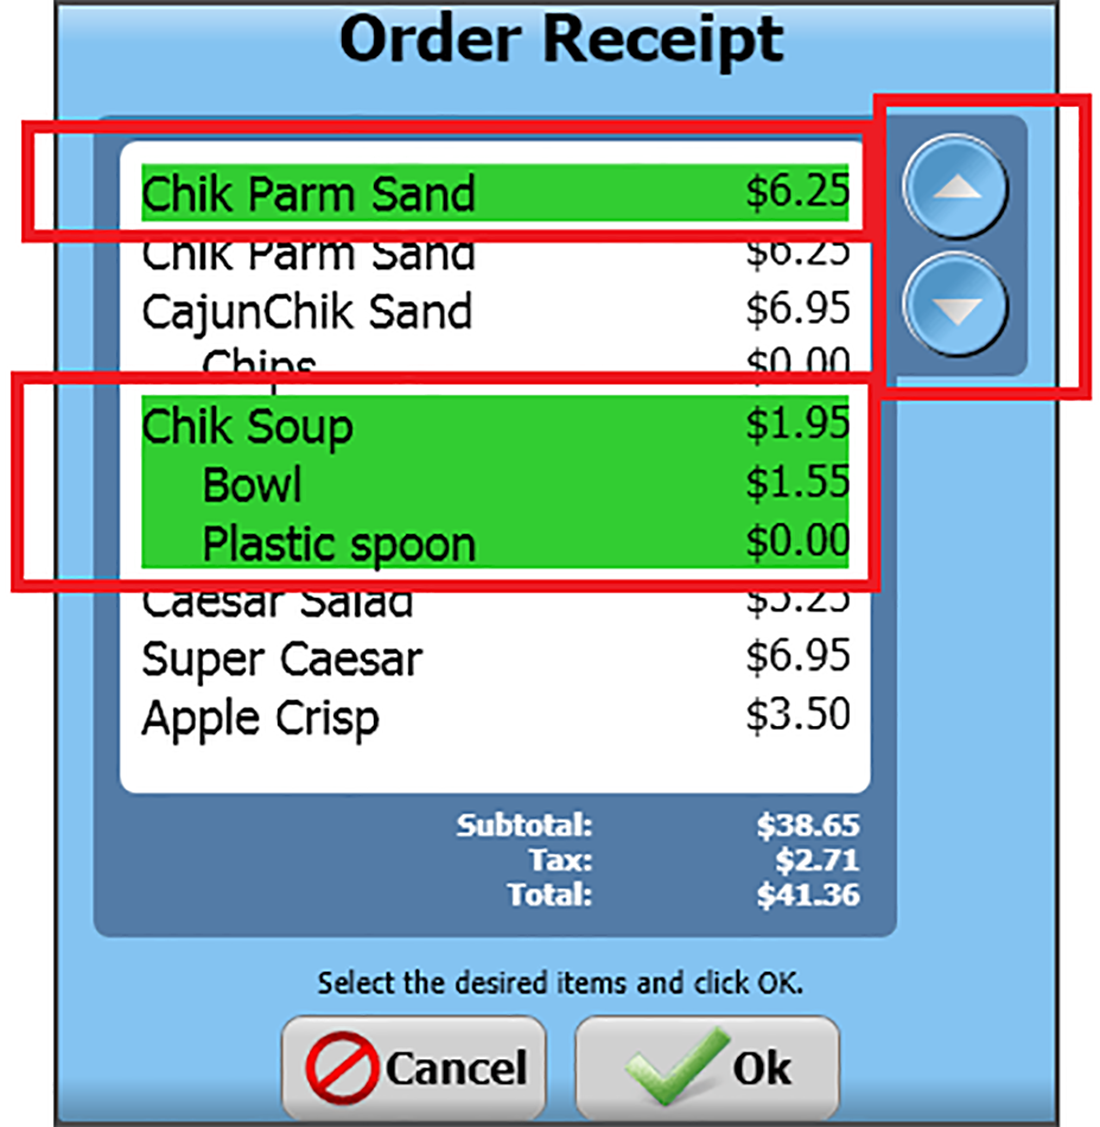 FOH_Order_Receipt_Screen.png